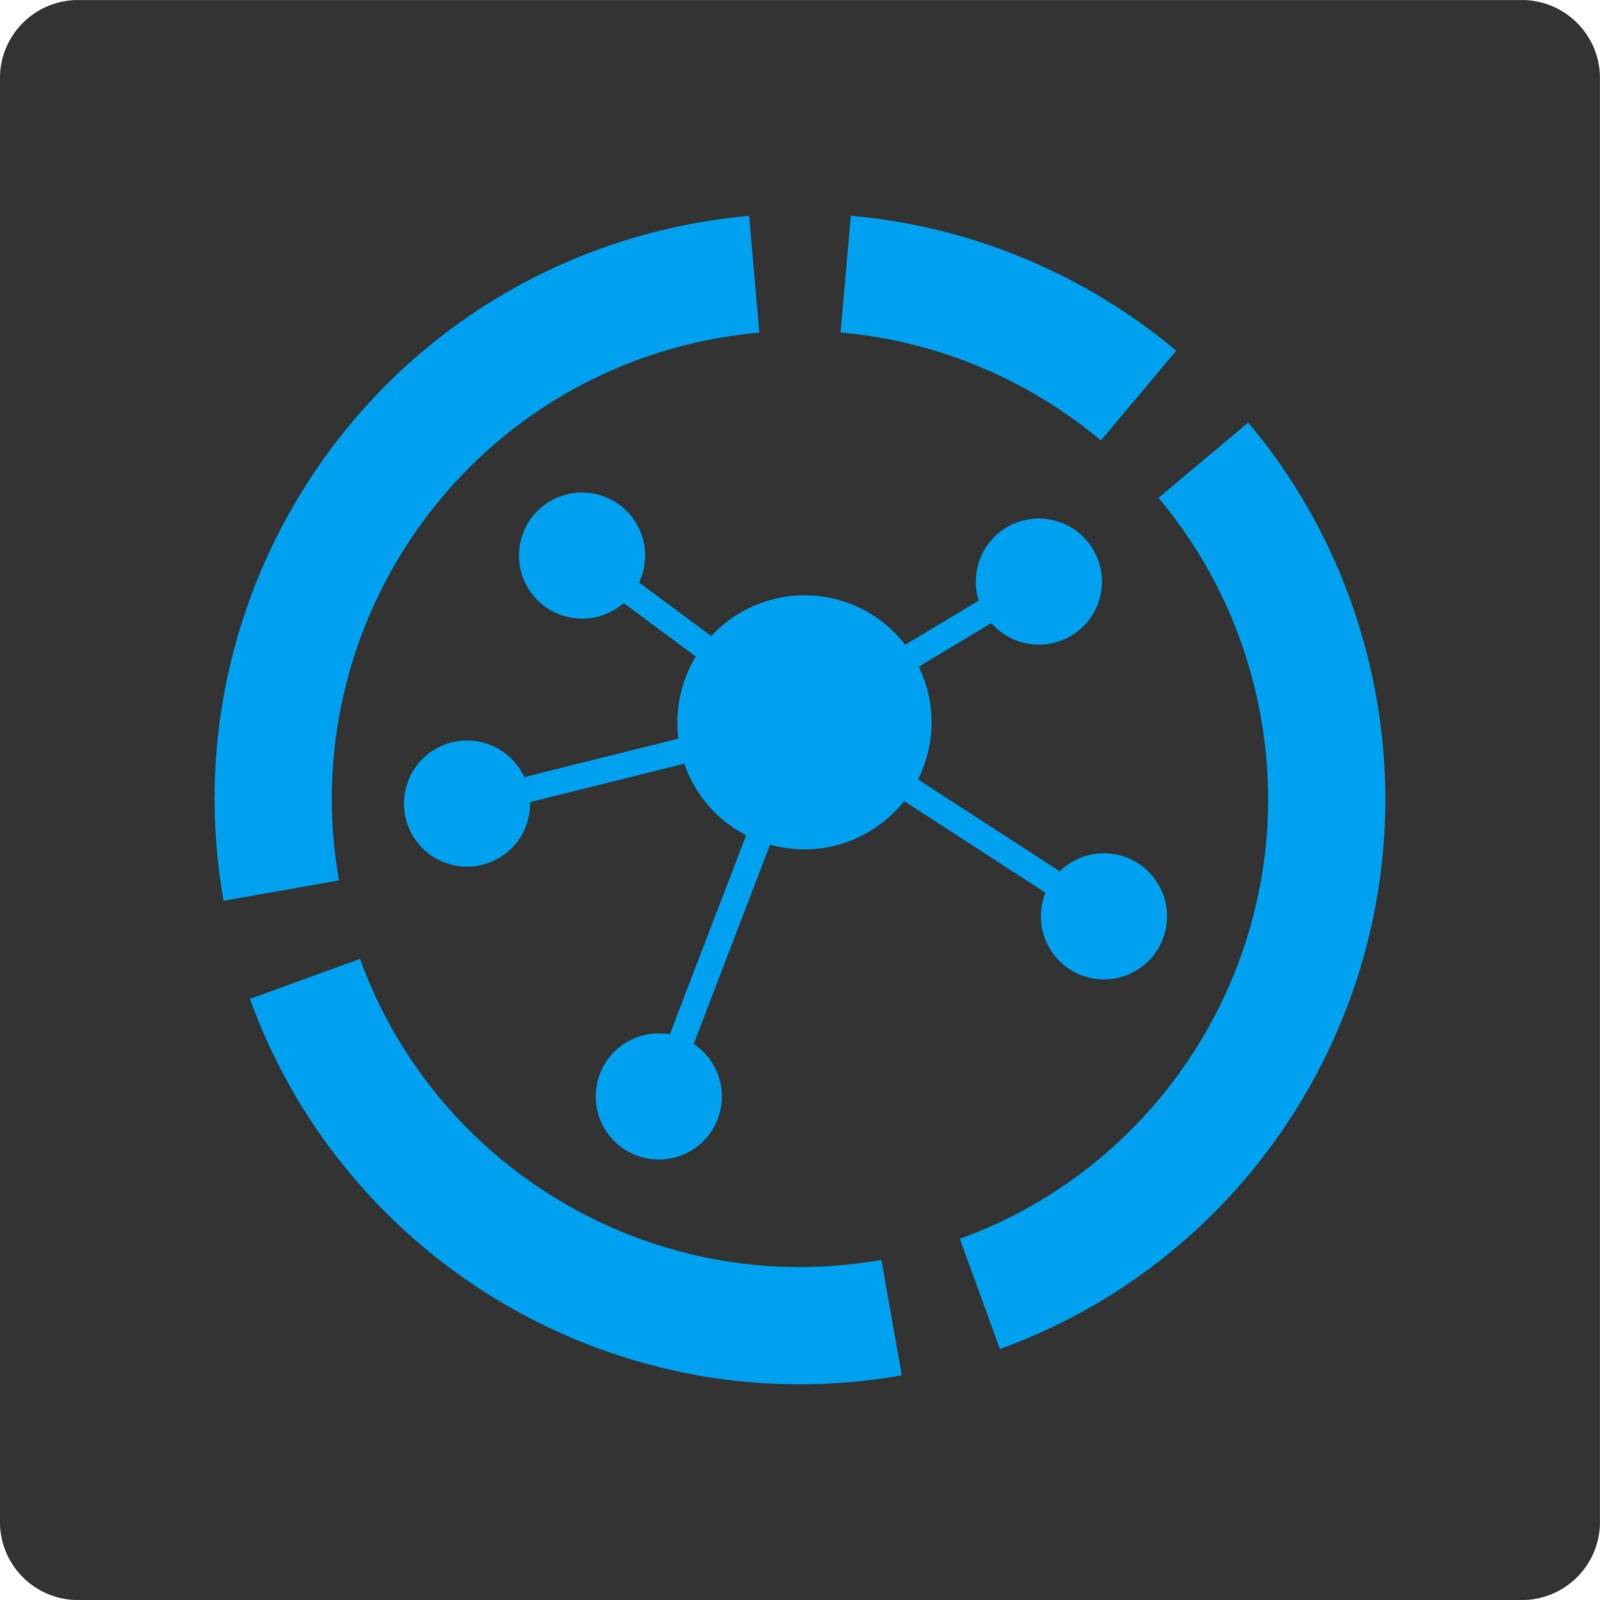 Connections diagram icon. Vector style is blue and gray colors, flat rounded square button on a white background.